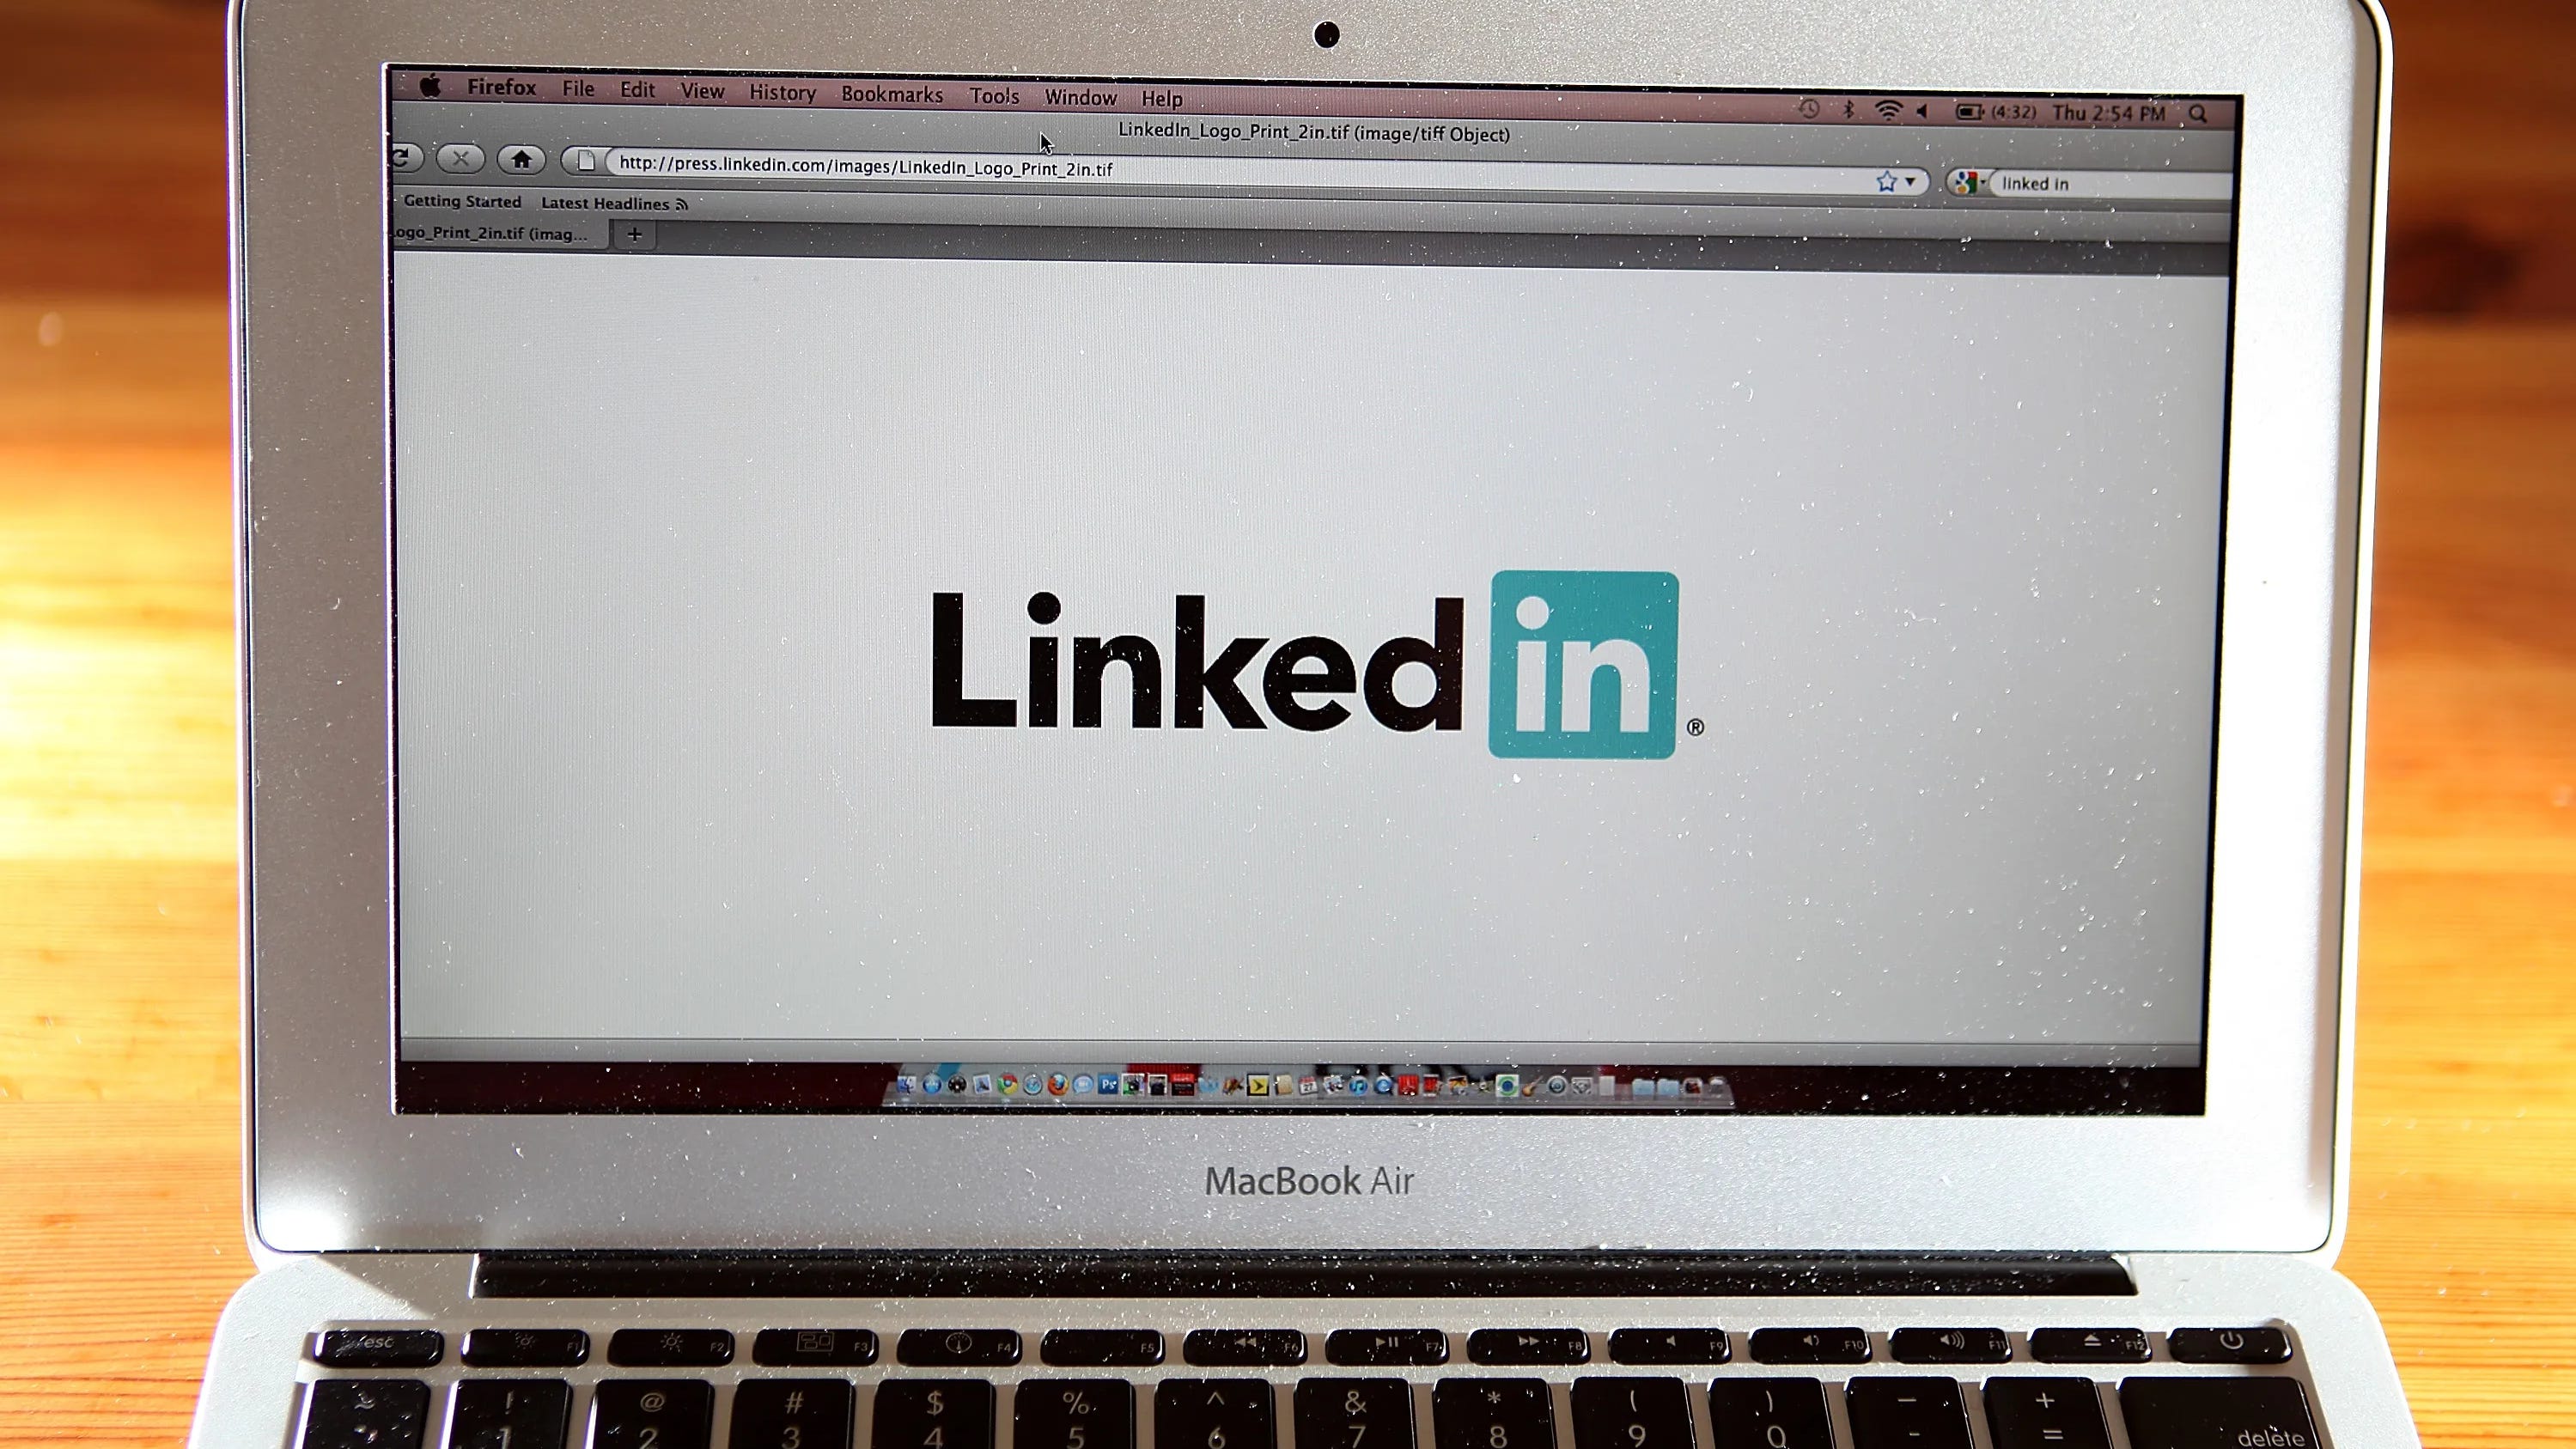 Using LinkedIn to find a job? Here are tips on scams to watch out for